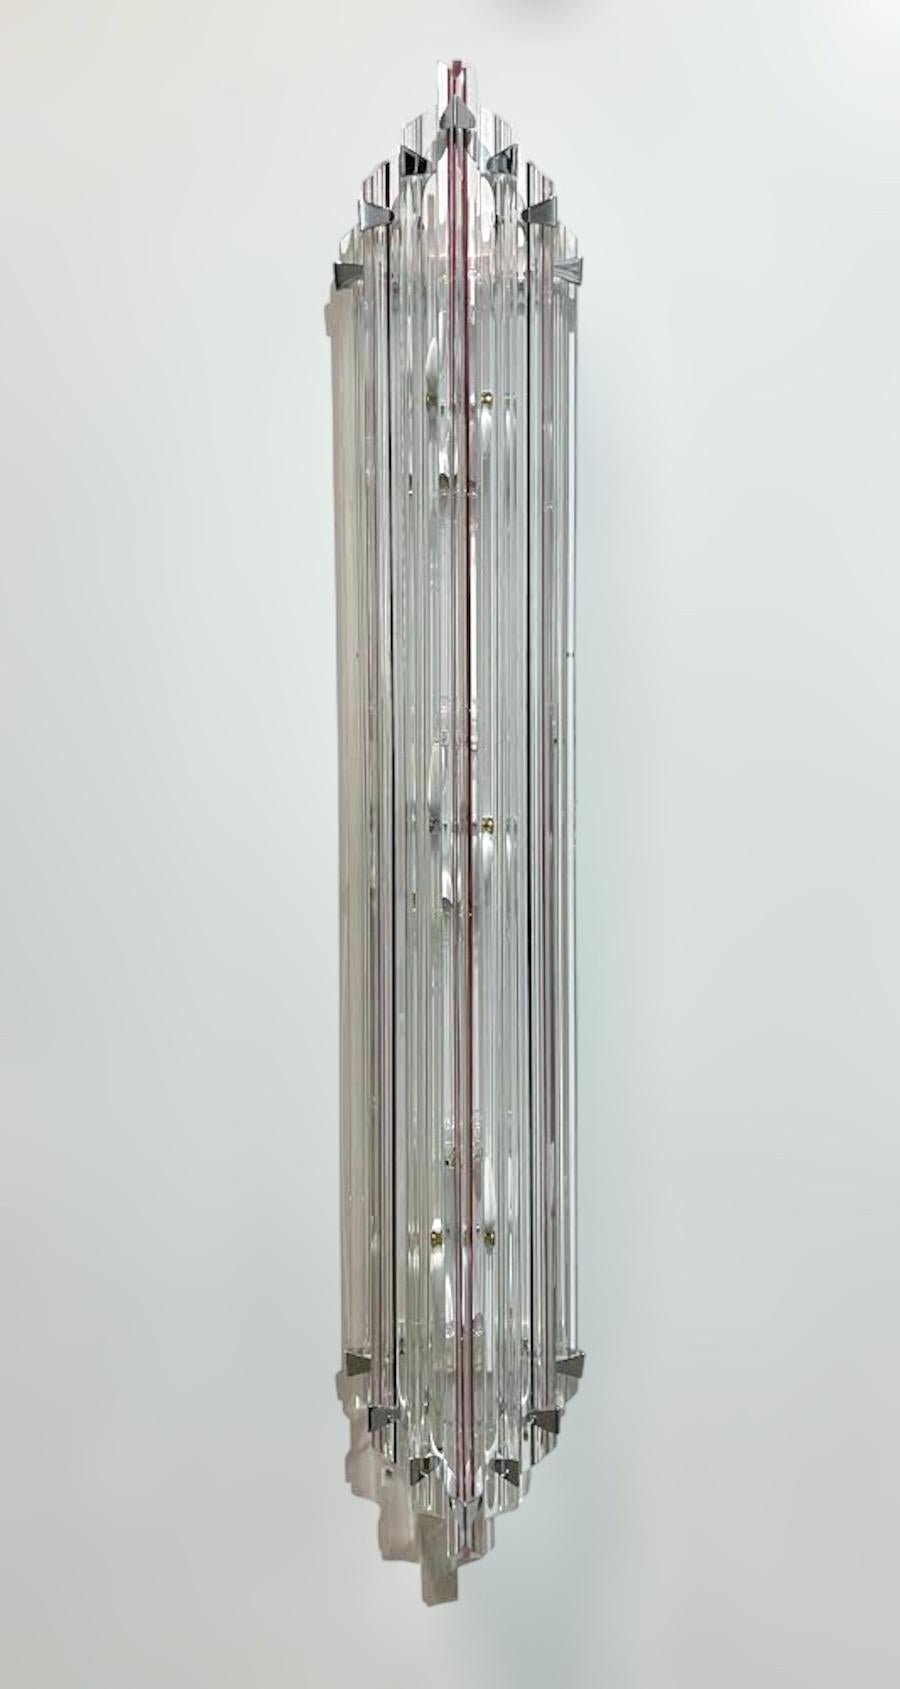 Italian wall light with clear crystals individually hand blown with red stripes and cut to three points in Triedri technique, mounted on chrome hardware and white metal back plate / Designed by Fabio Bergomi for Fabio Ltd / Made in Italy.
6 lights /